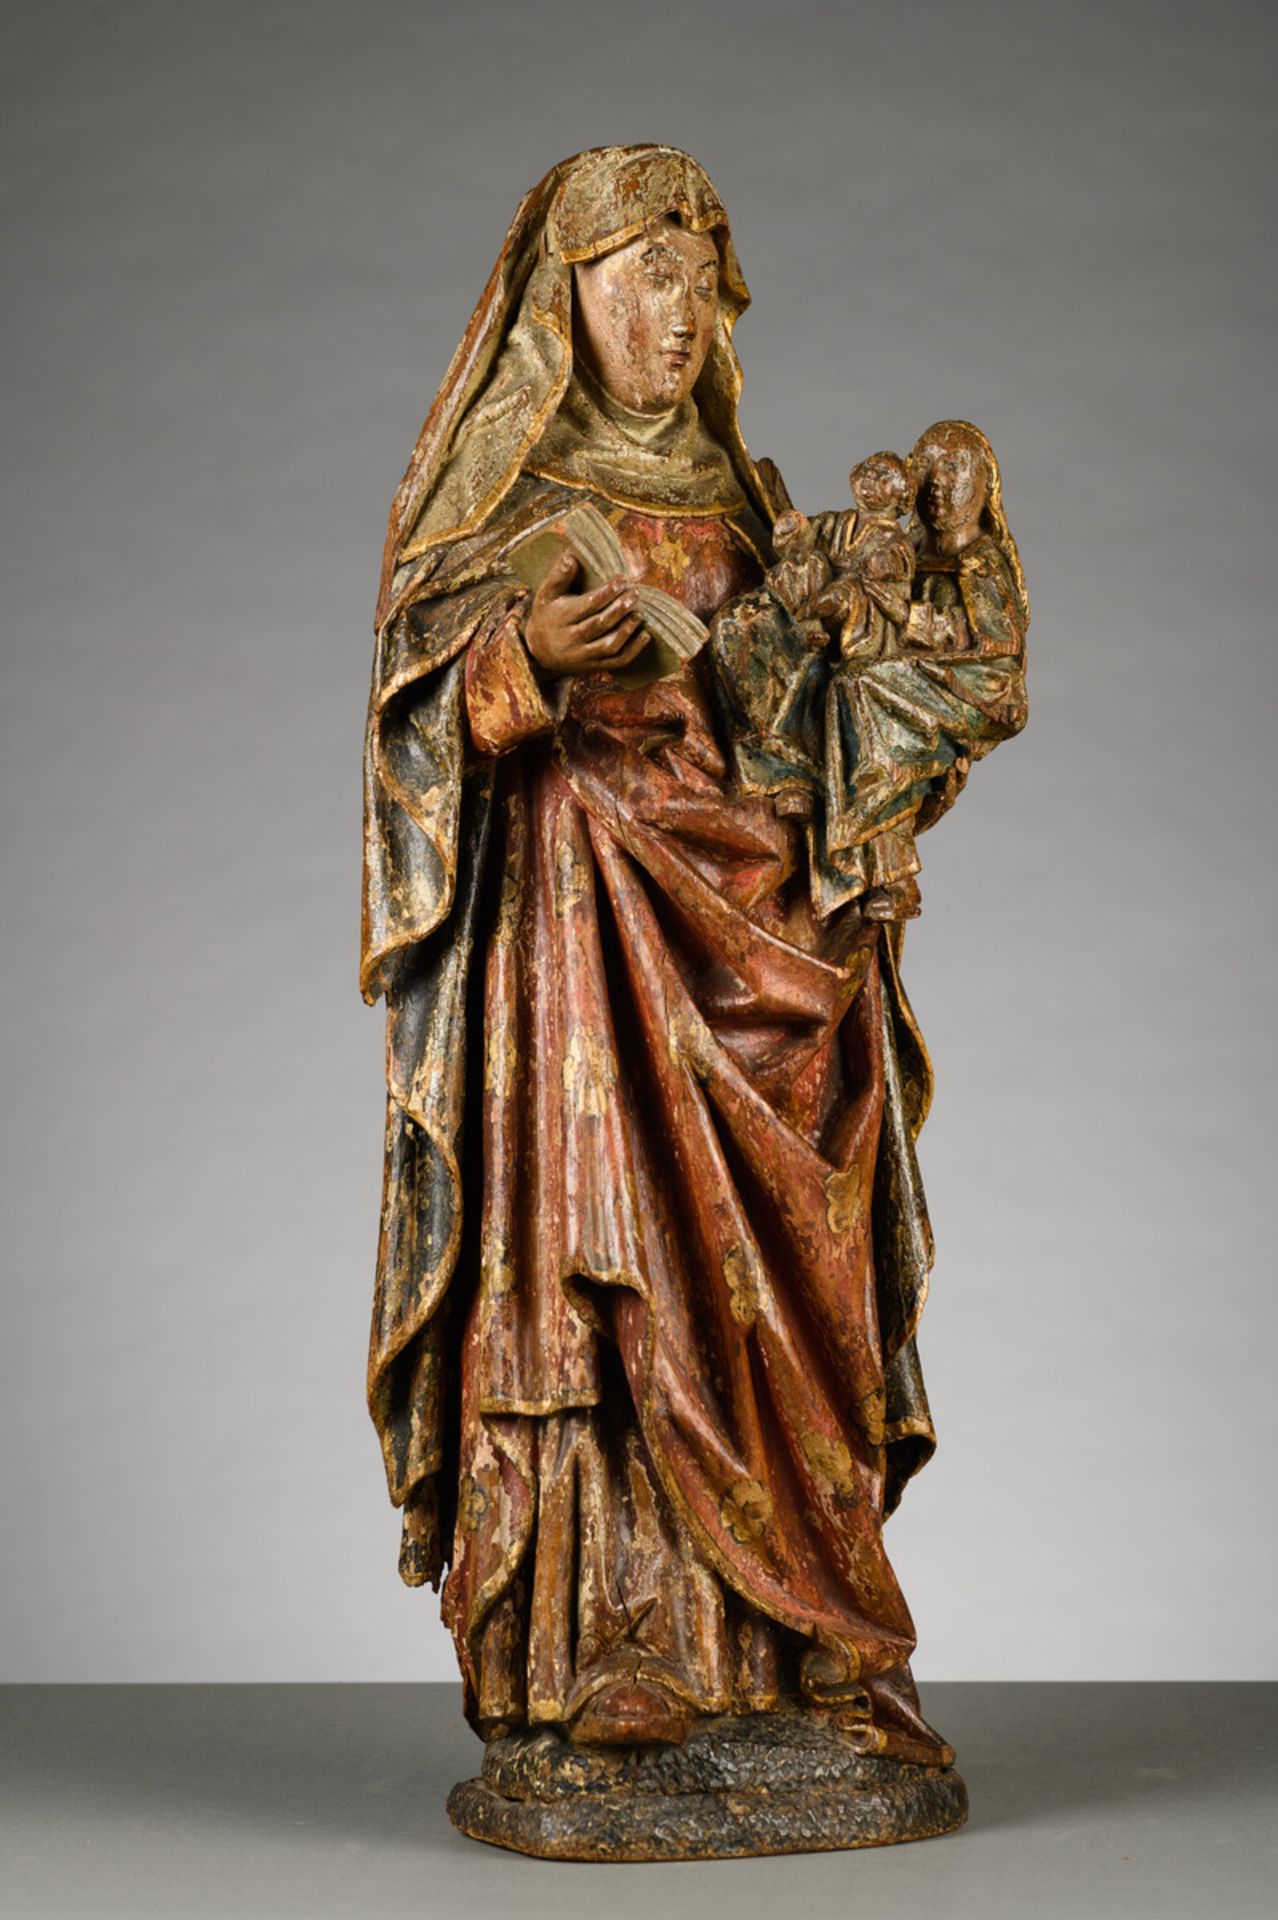 Polychrome wooden statue 'The Virgin and Child with St. Anne' 15th - 16th century (h68cm) - Image 3 of 7